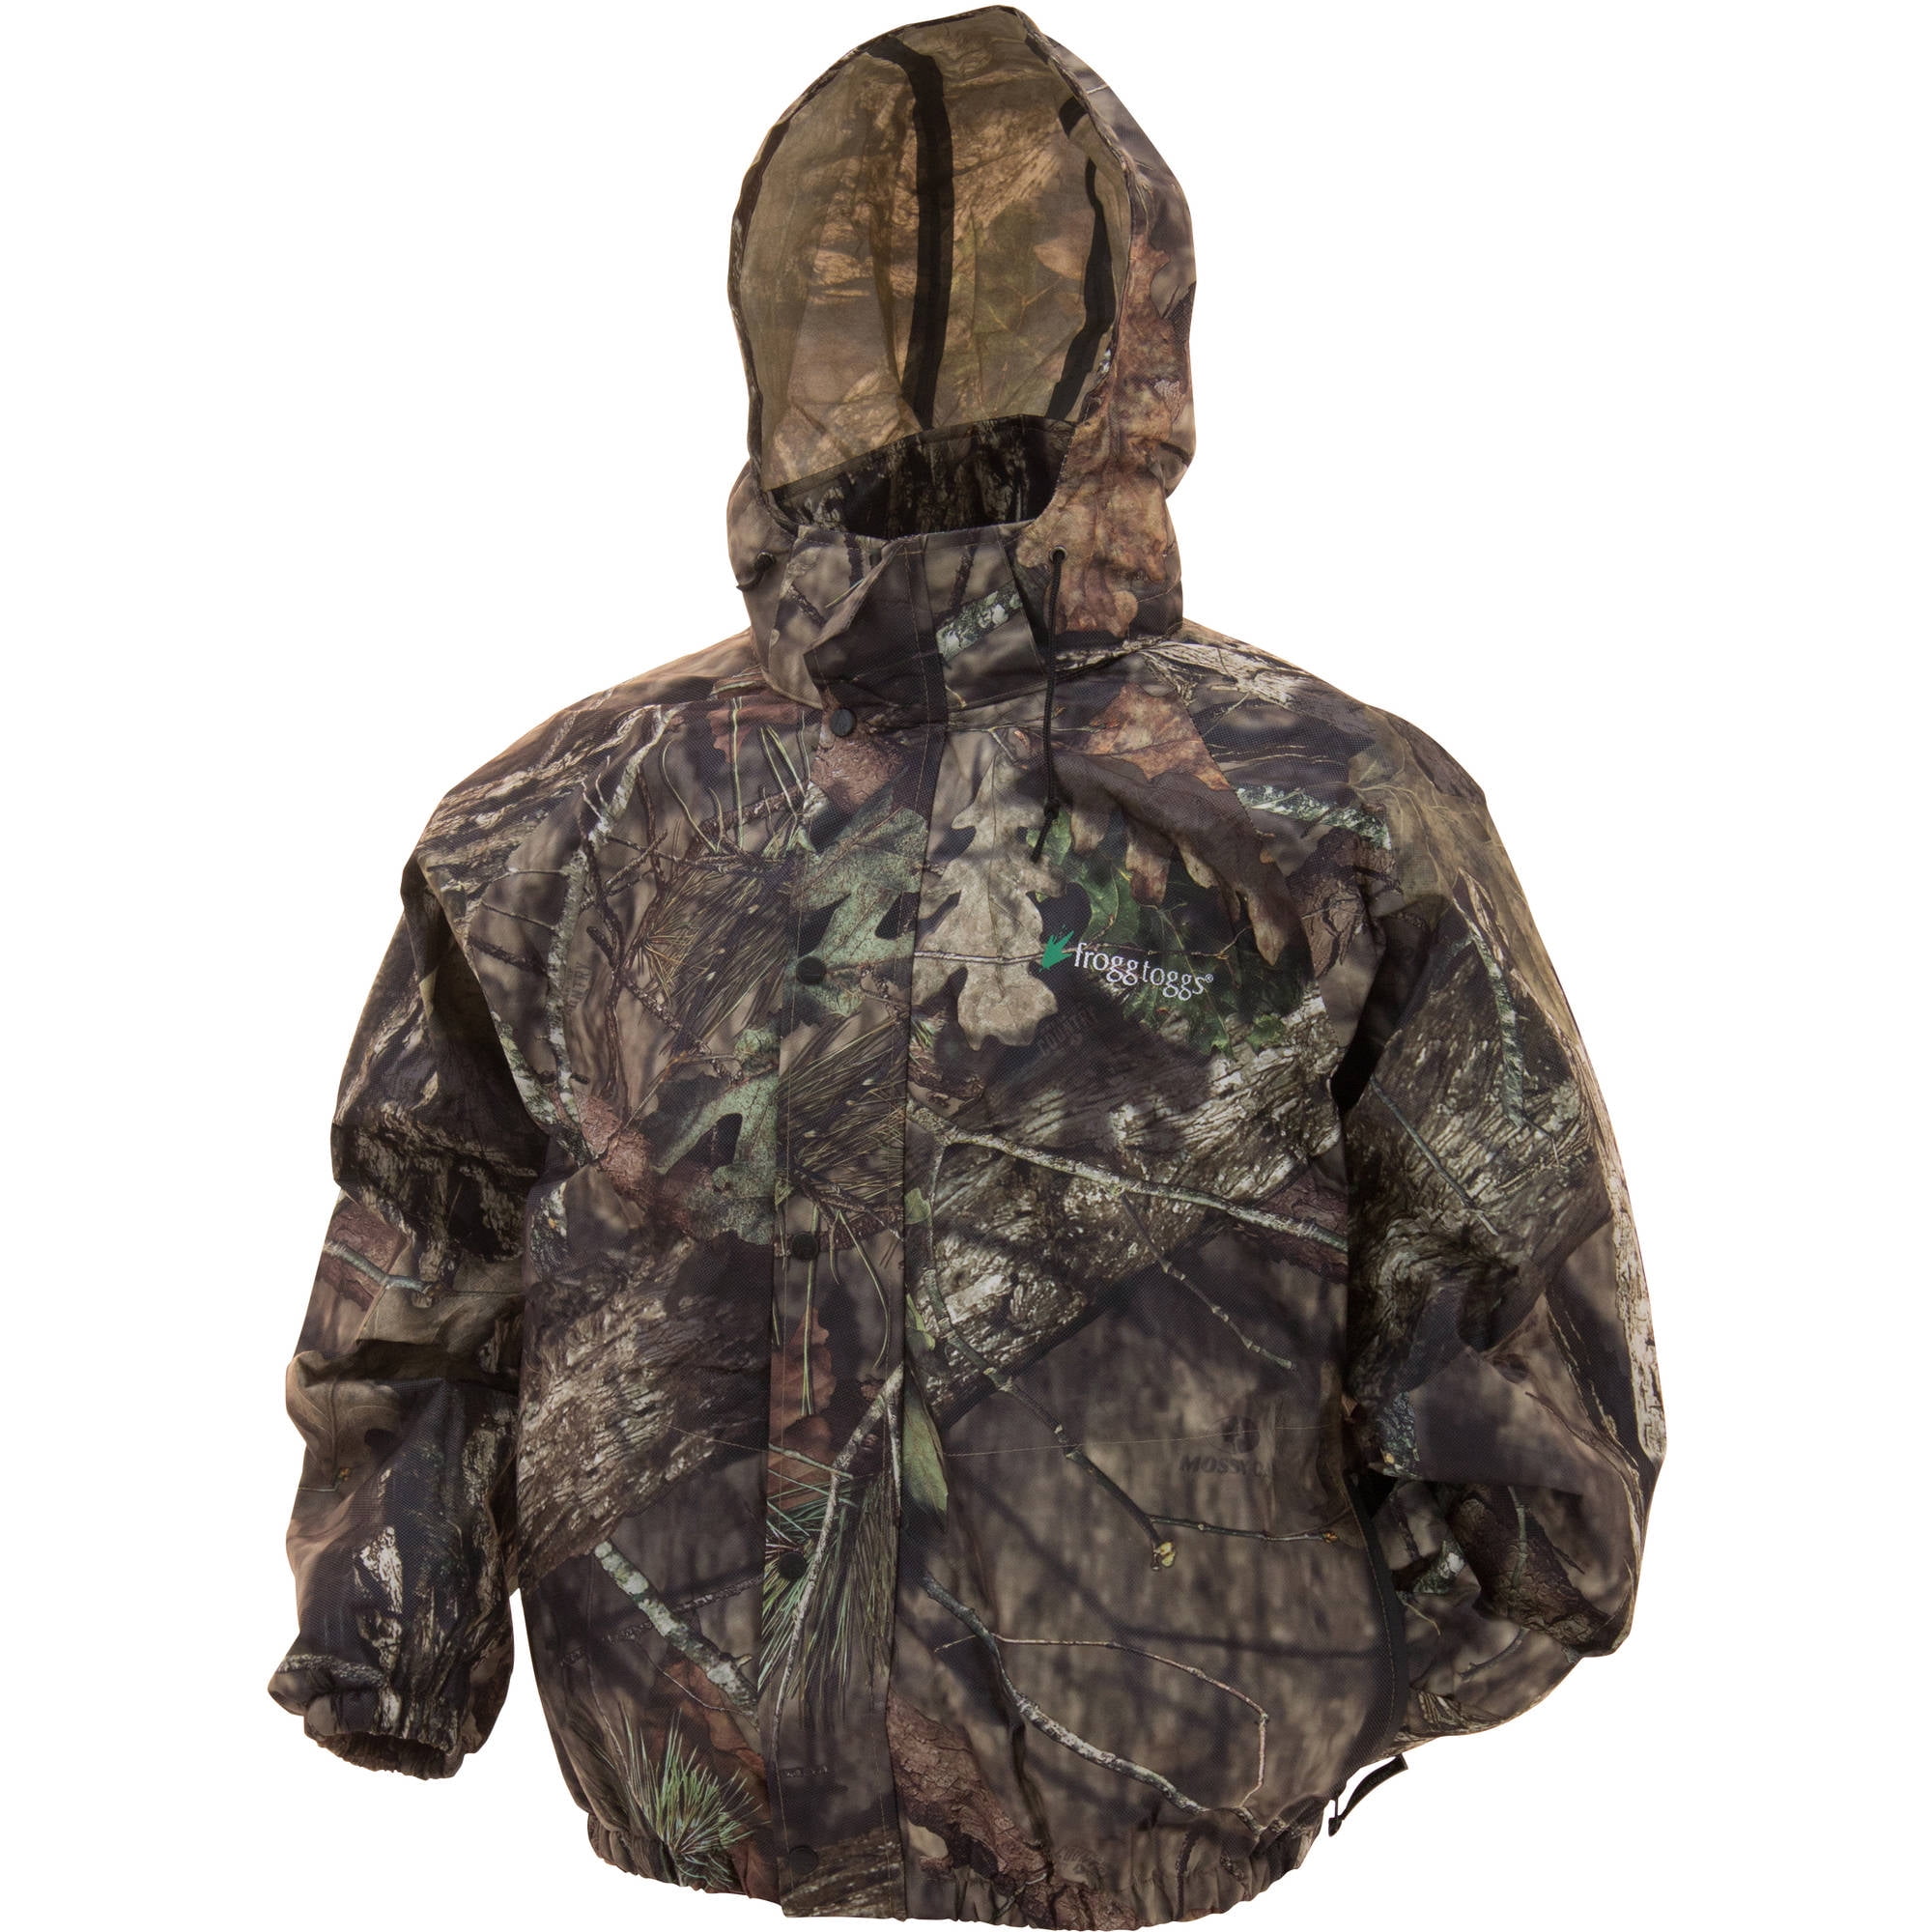 Frogg Toggs Pro Action Camo Jacket, Mossy Oak Break Up Country ...